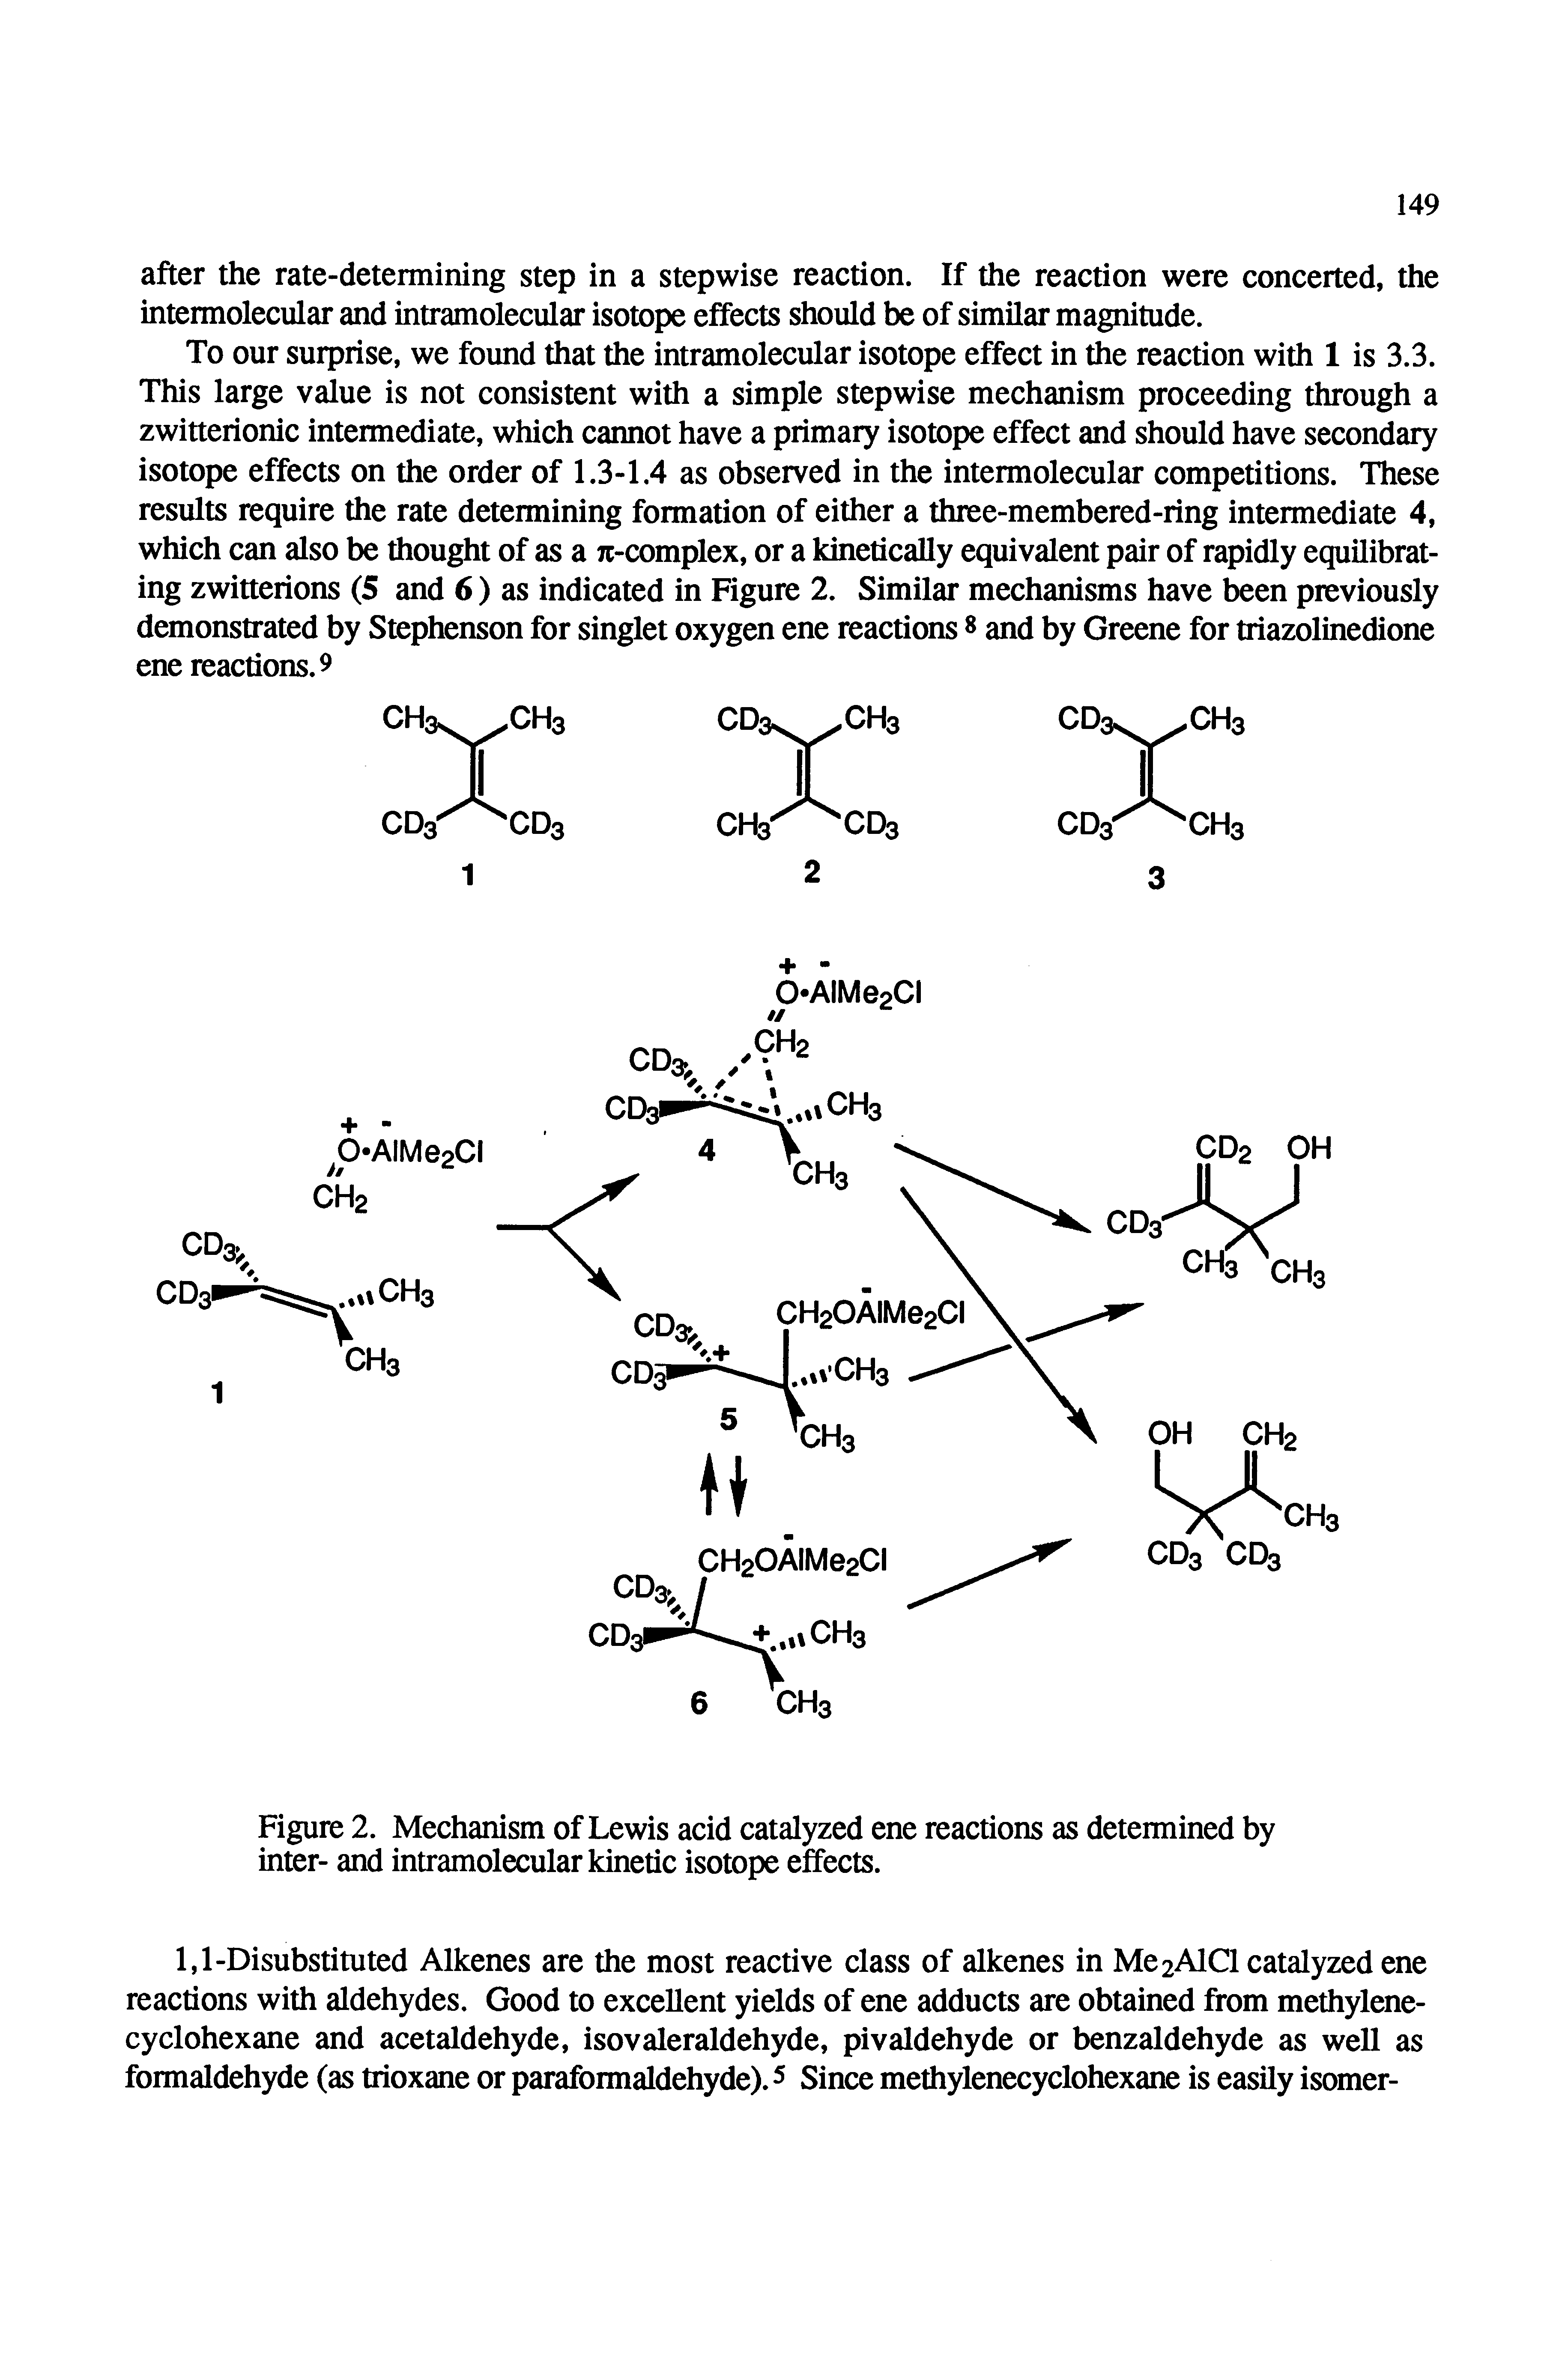 Figure 2. Mechanism of Lewis acid catalyzed ene reactions as detemiined by inter- and intramolecular kinetic isotope effects.